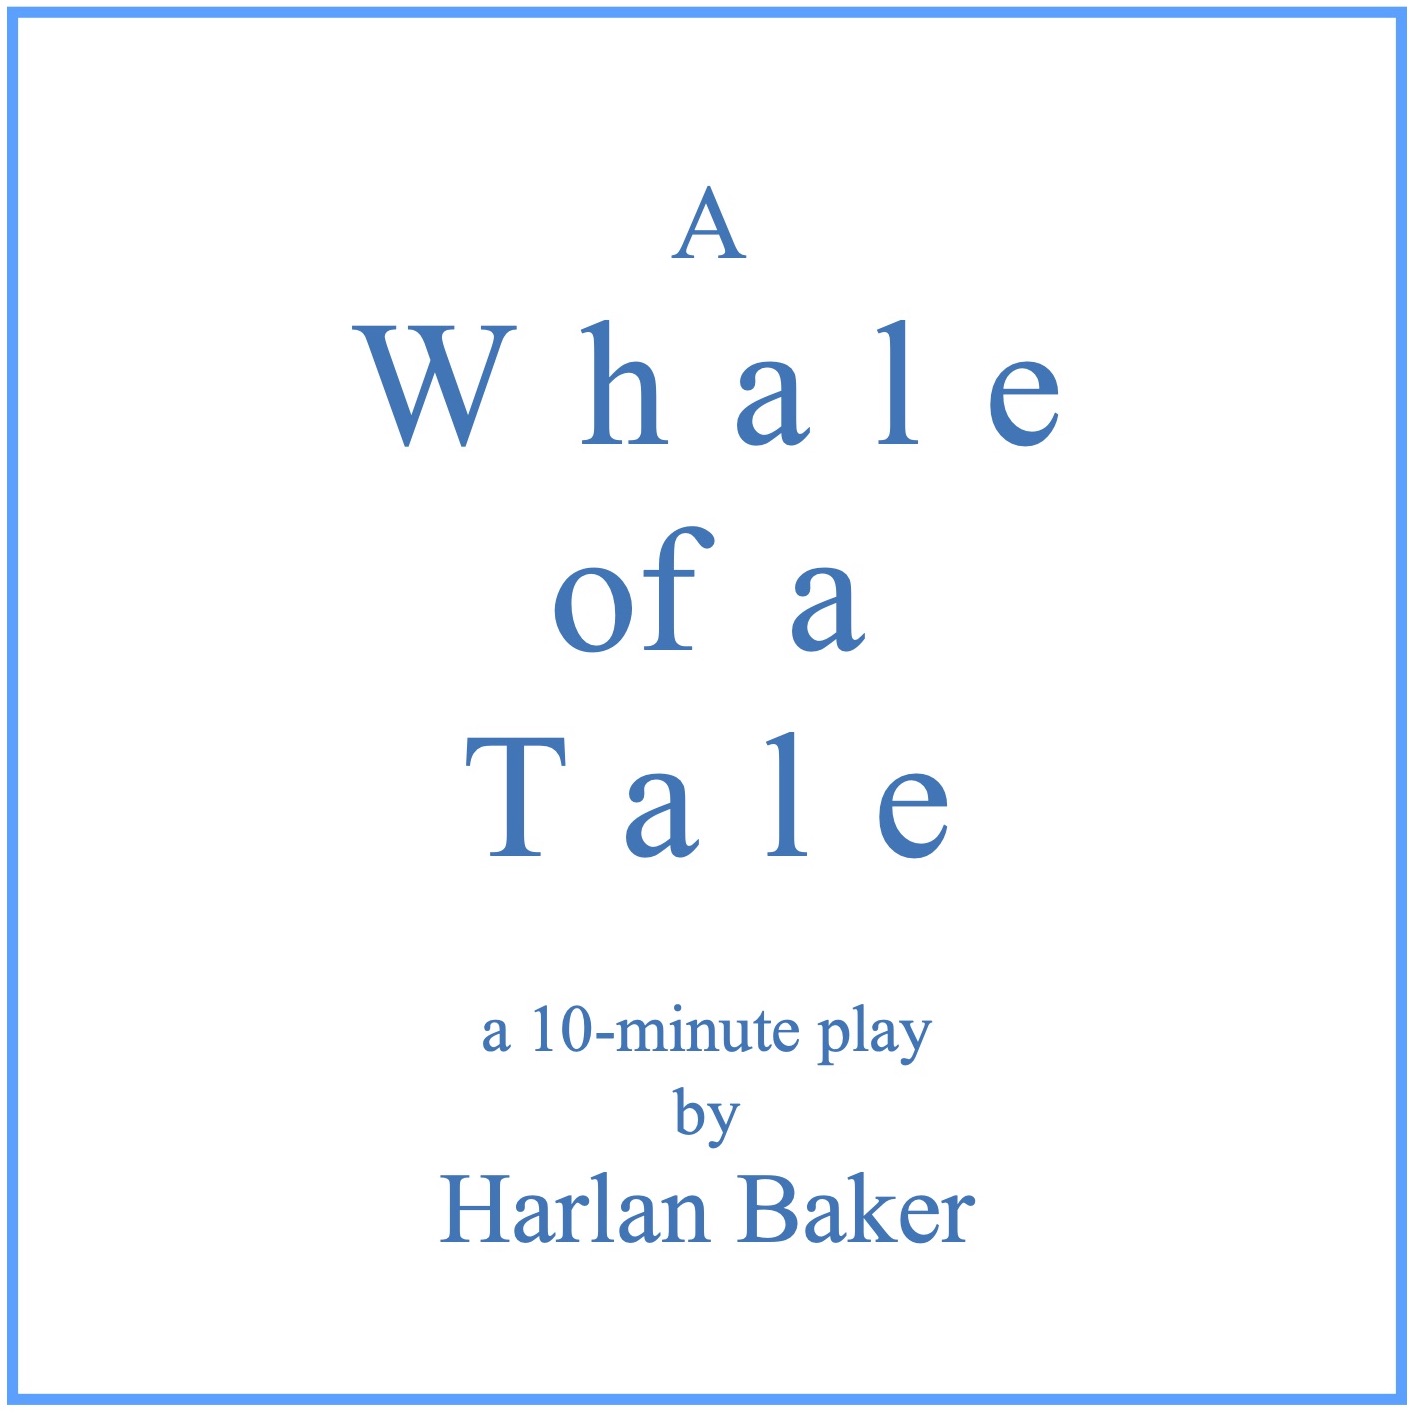 A Whale of a Tale • a 10-Minute Play